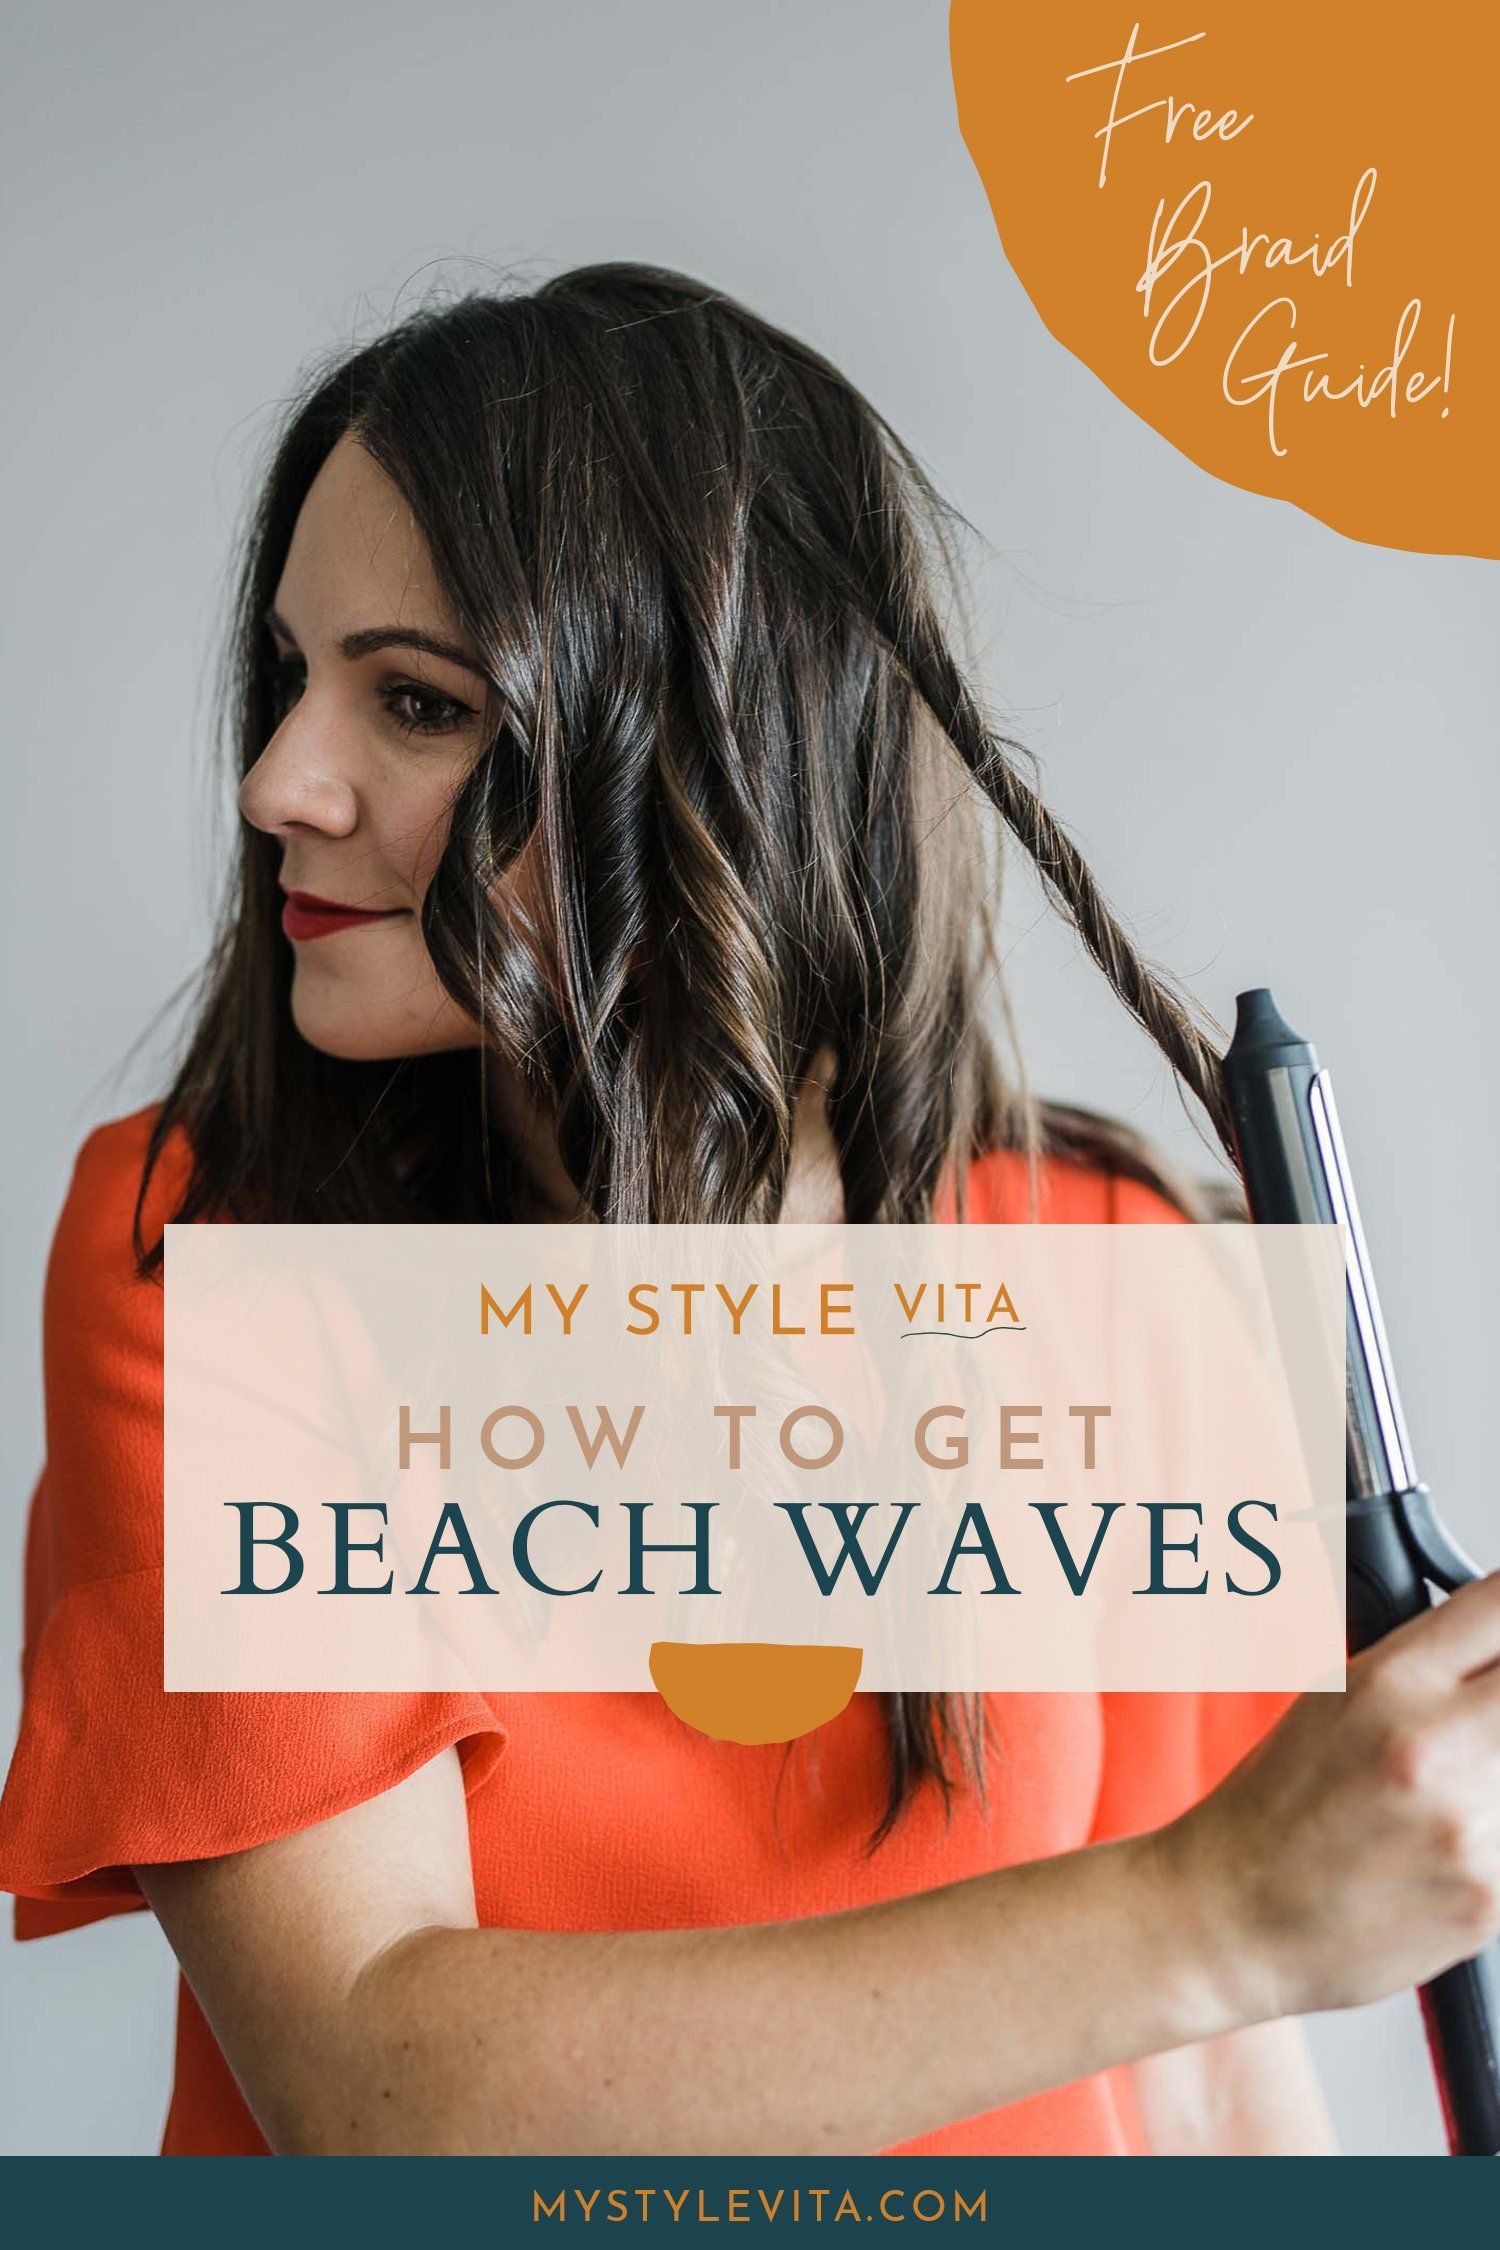 18 hair Waves how to get ideas